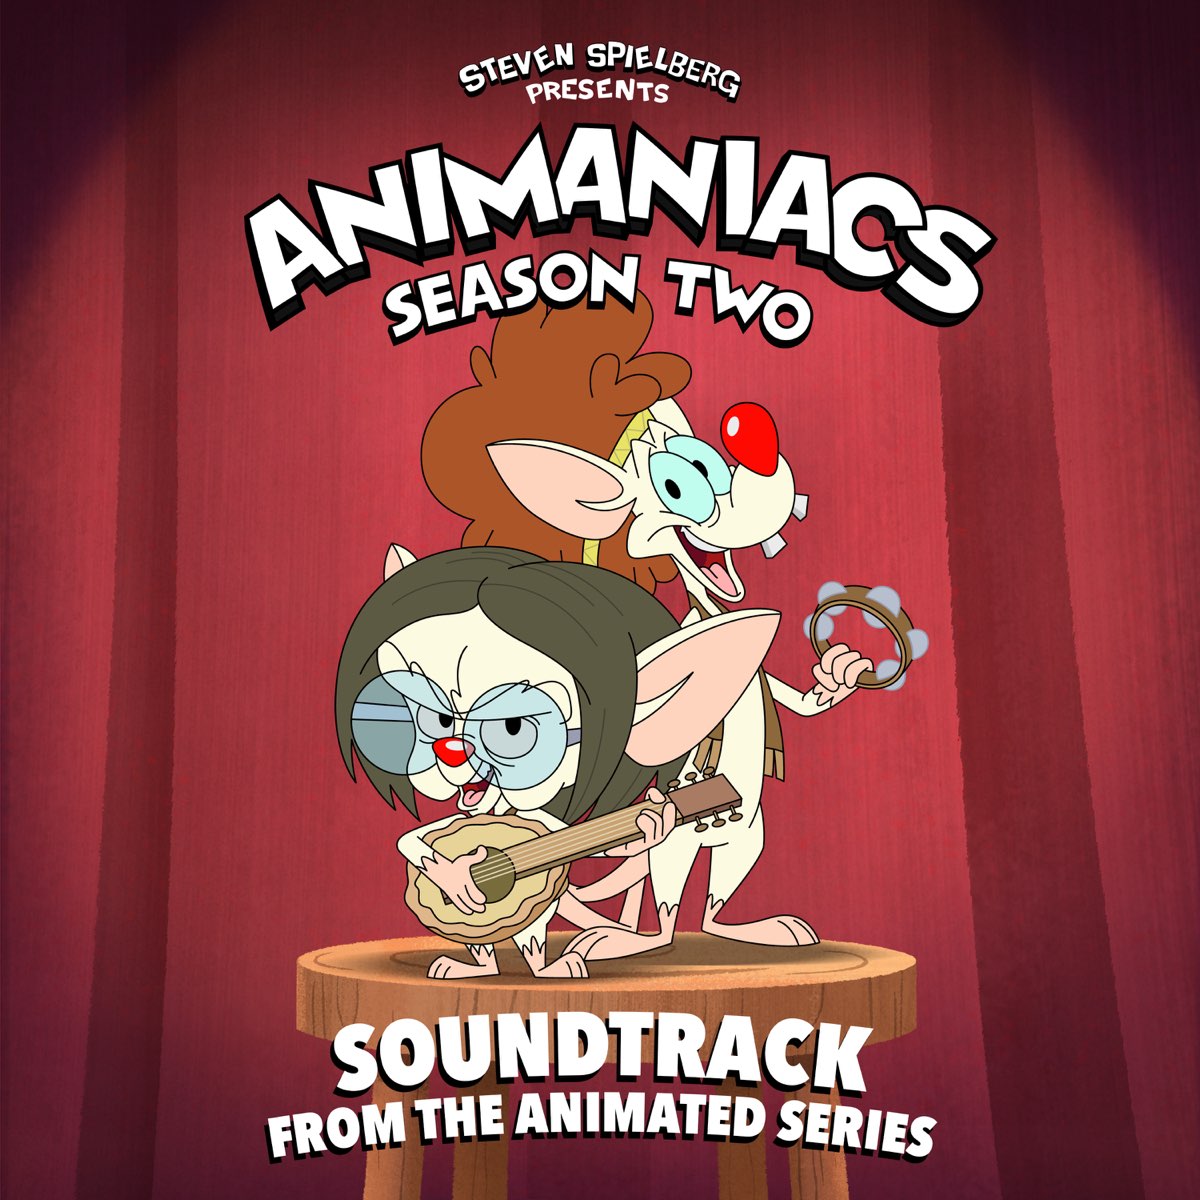 ‎Animaniacs Season 2 (Soundtrack from the Animated Series) by